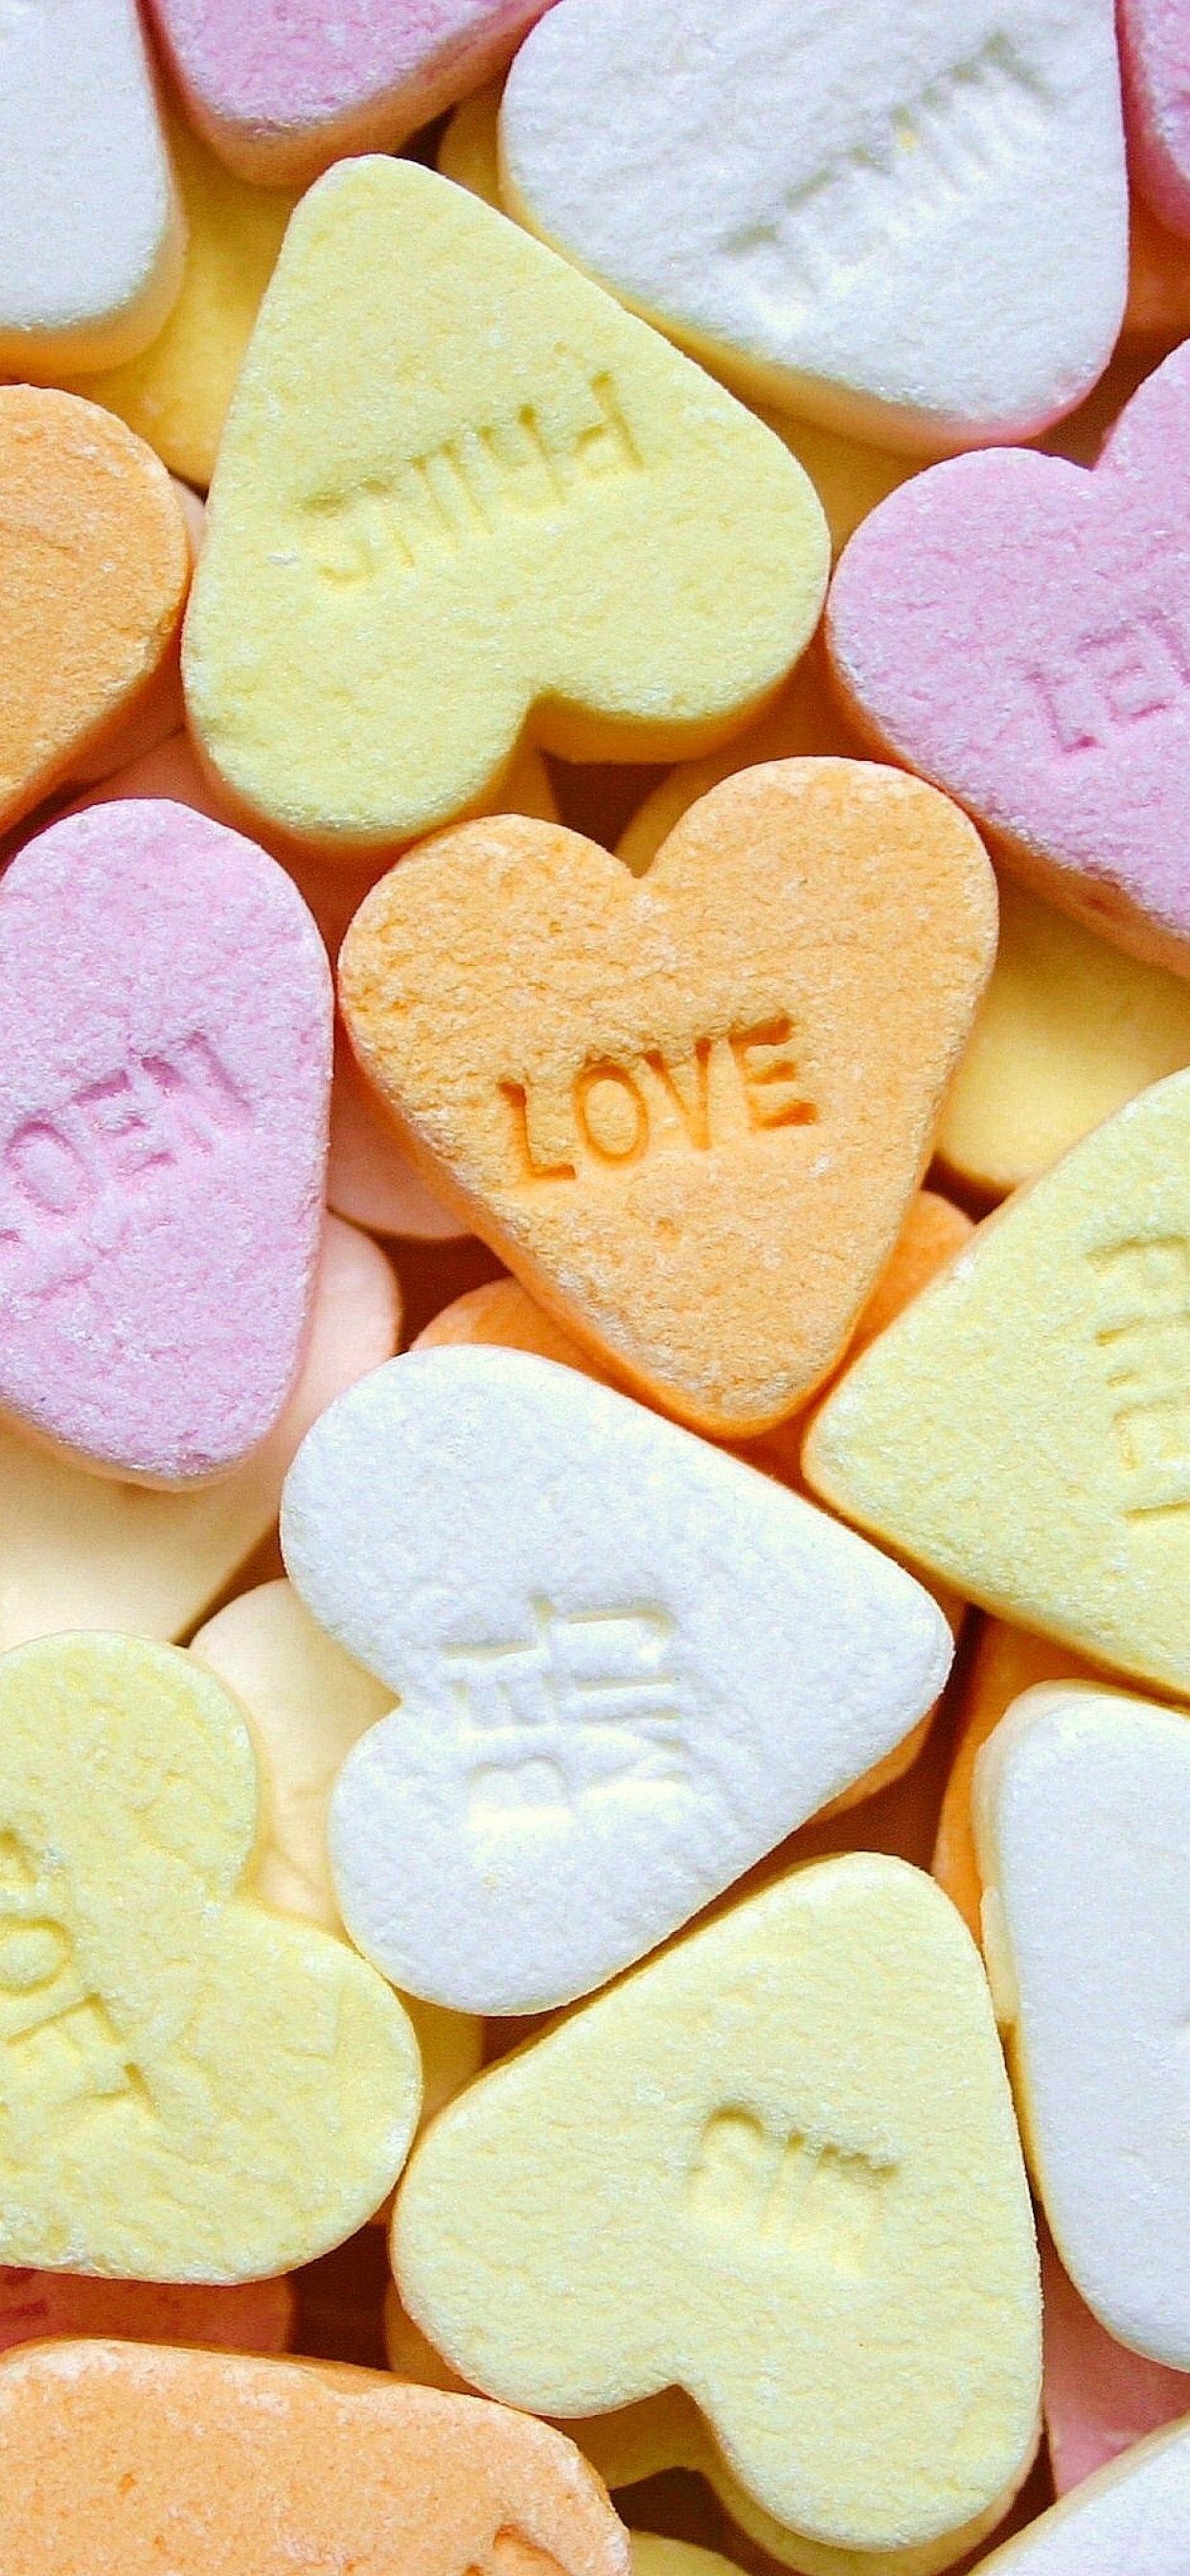 IPhone wallpaper of a pile of candy hearts with one saying love - Candy